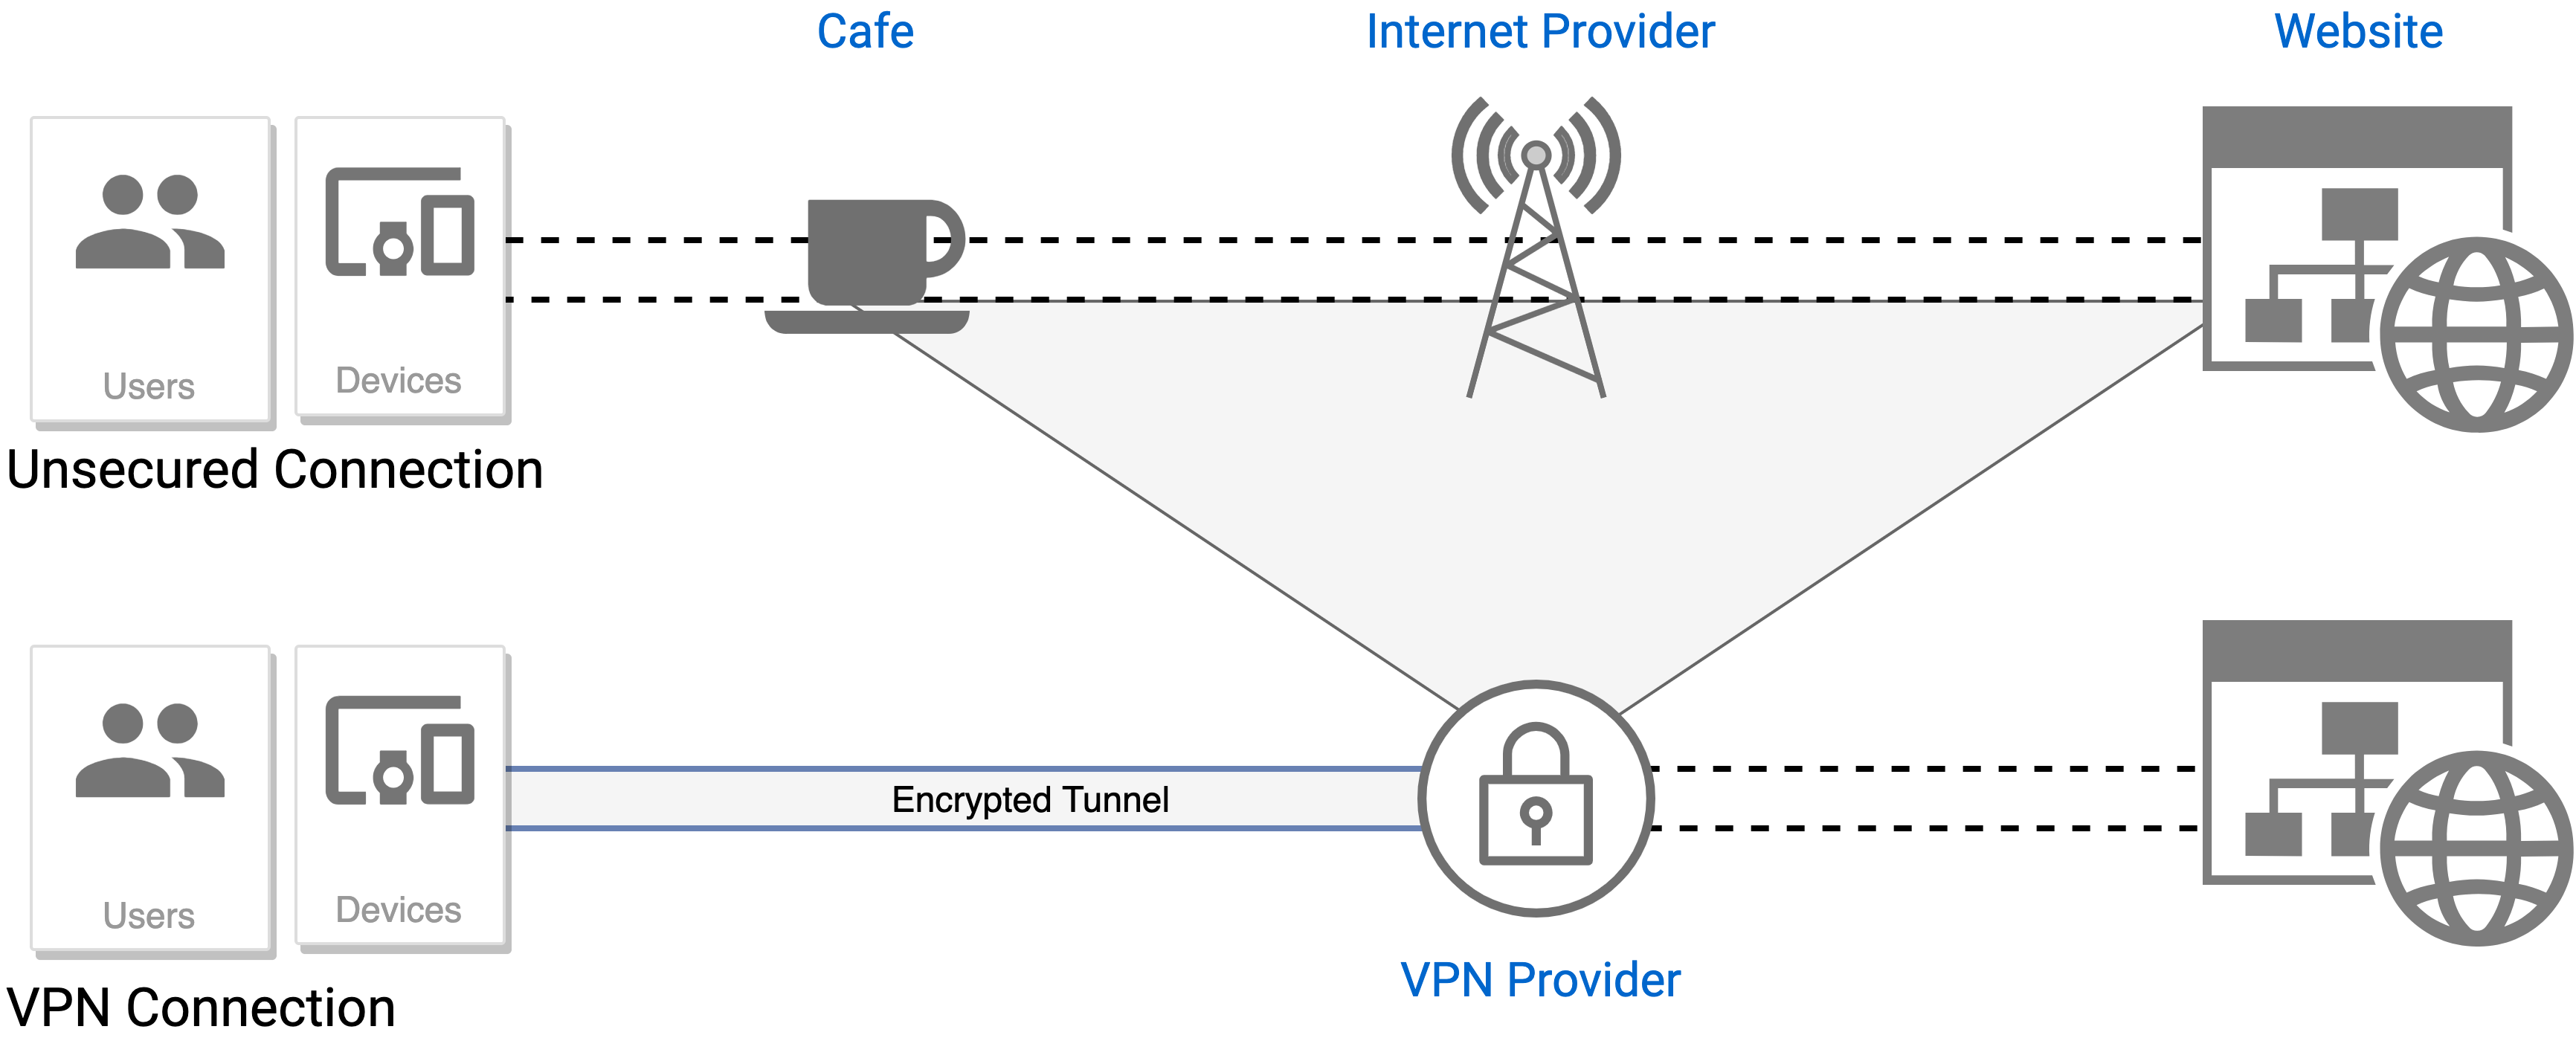 What does VPN not protect against?